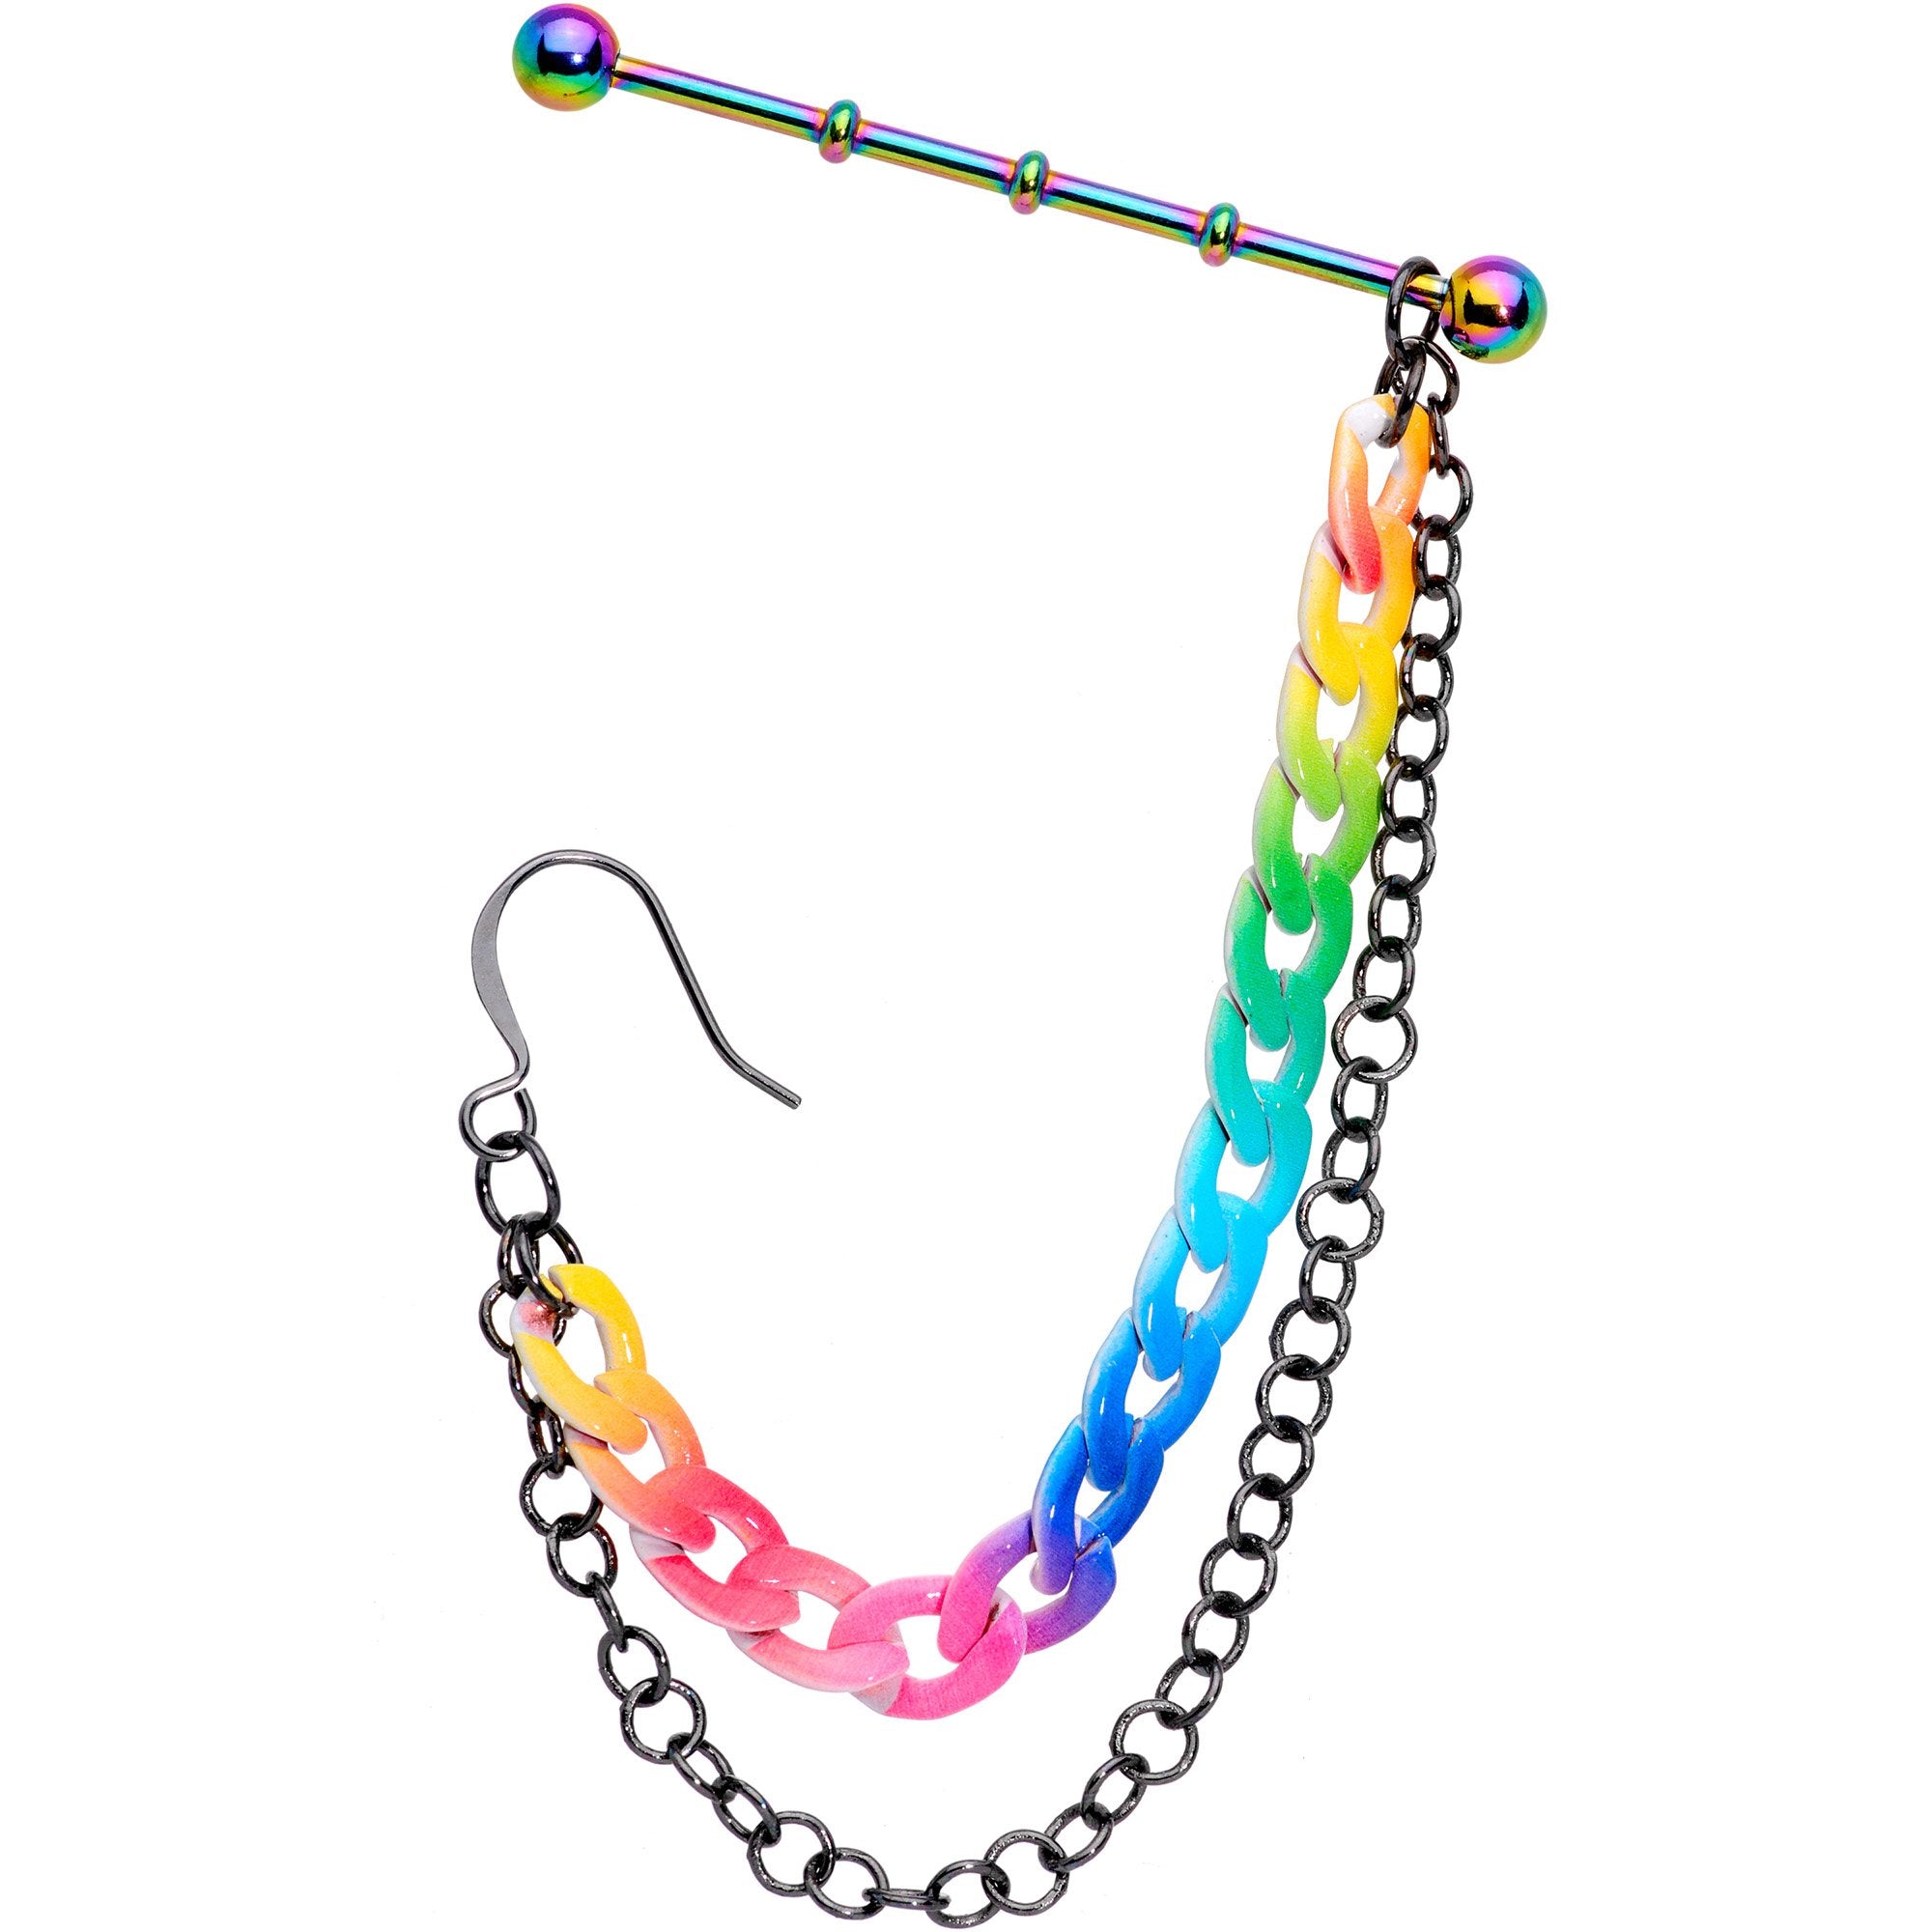 Rainbow Anodized Double Chain Industrial Barbell Chain Earring 38mm